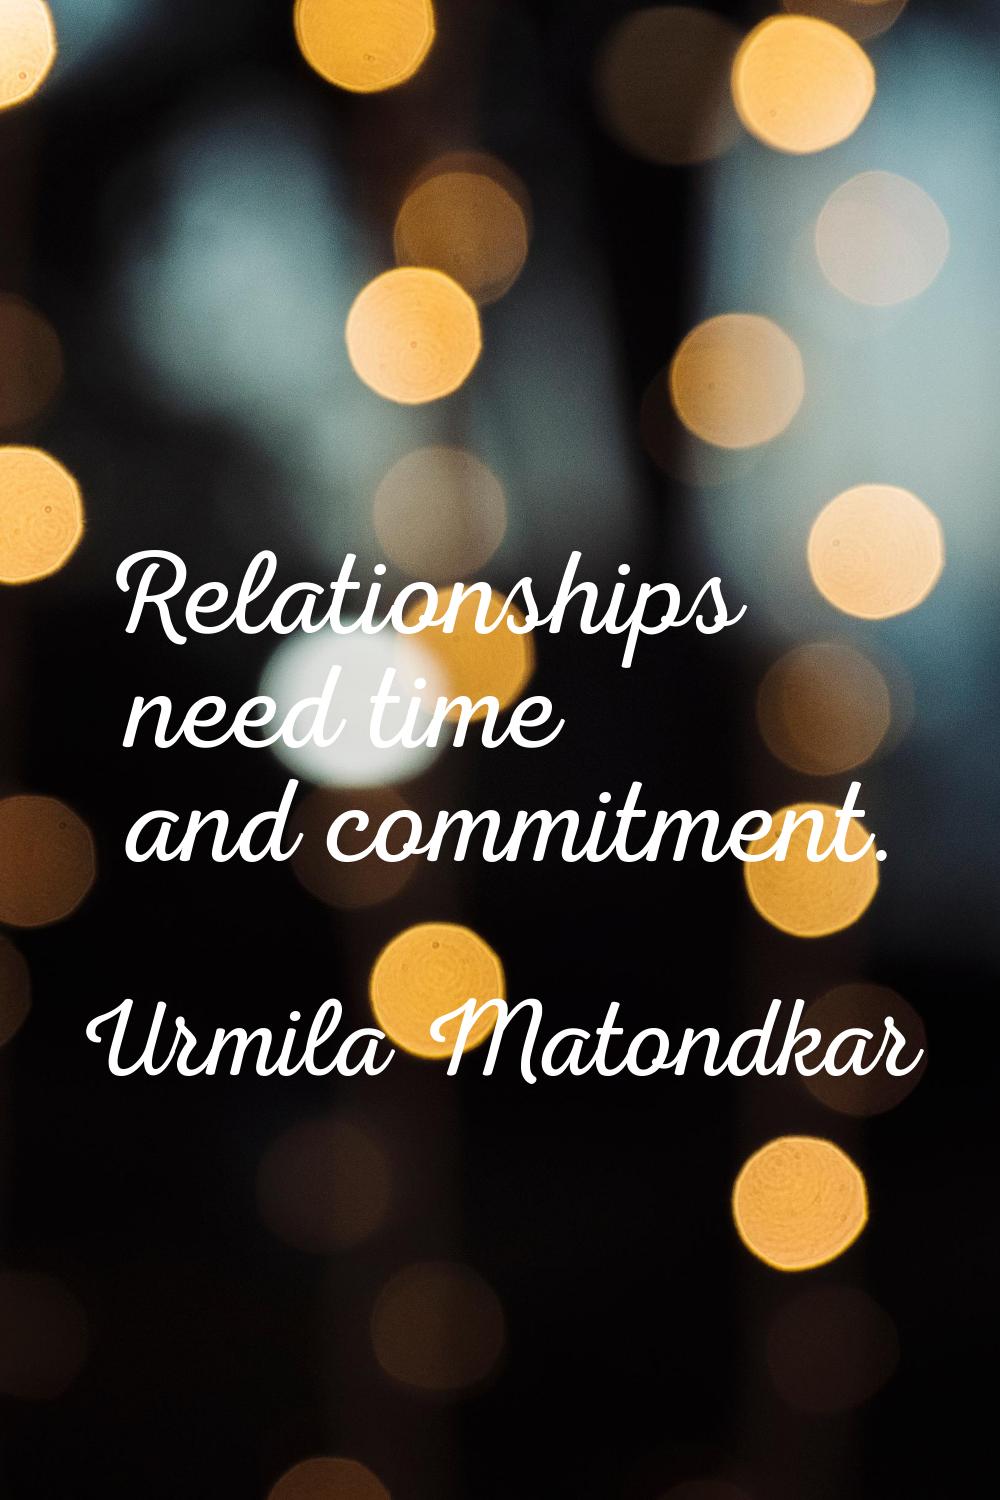 Relationships need time and commitment.